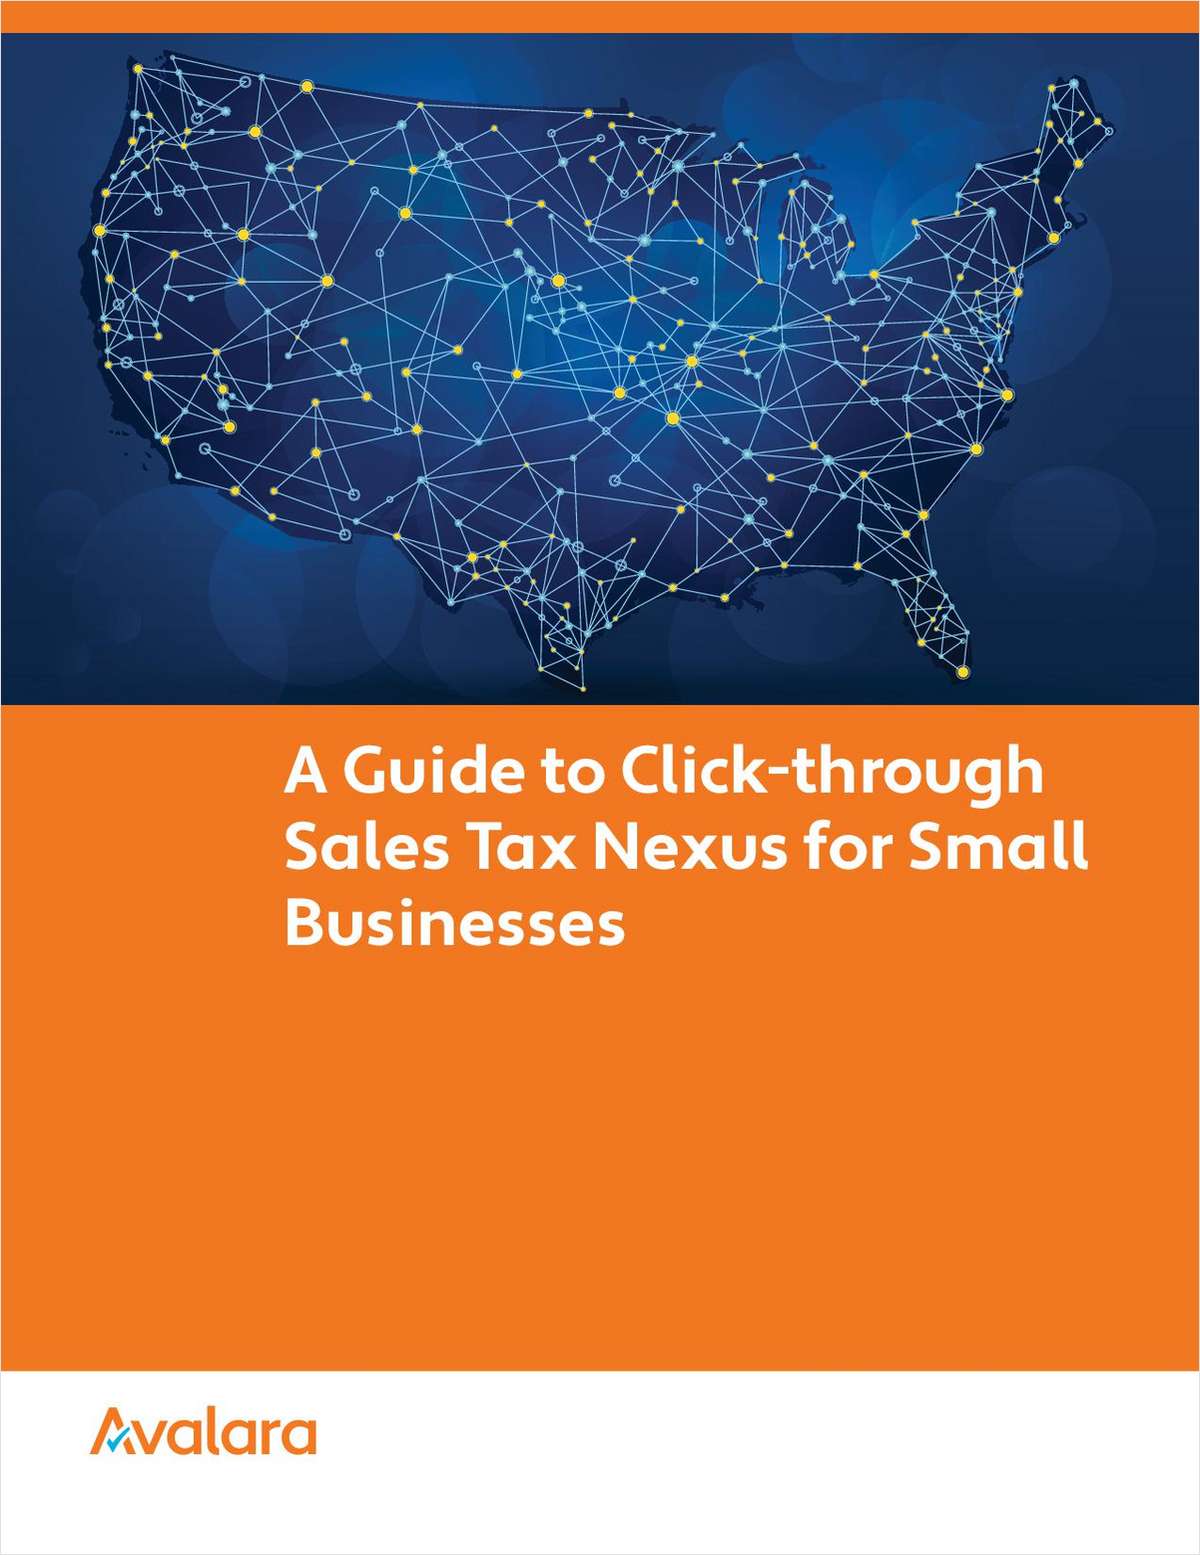 A Guide to Click-through Sales Tax Nexus for Small Businesses